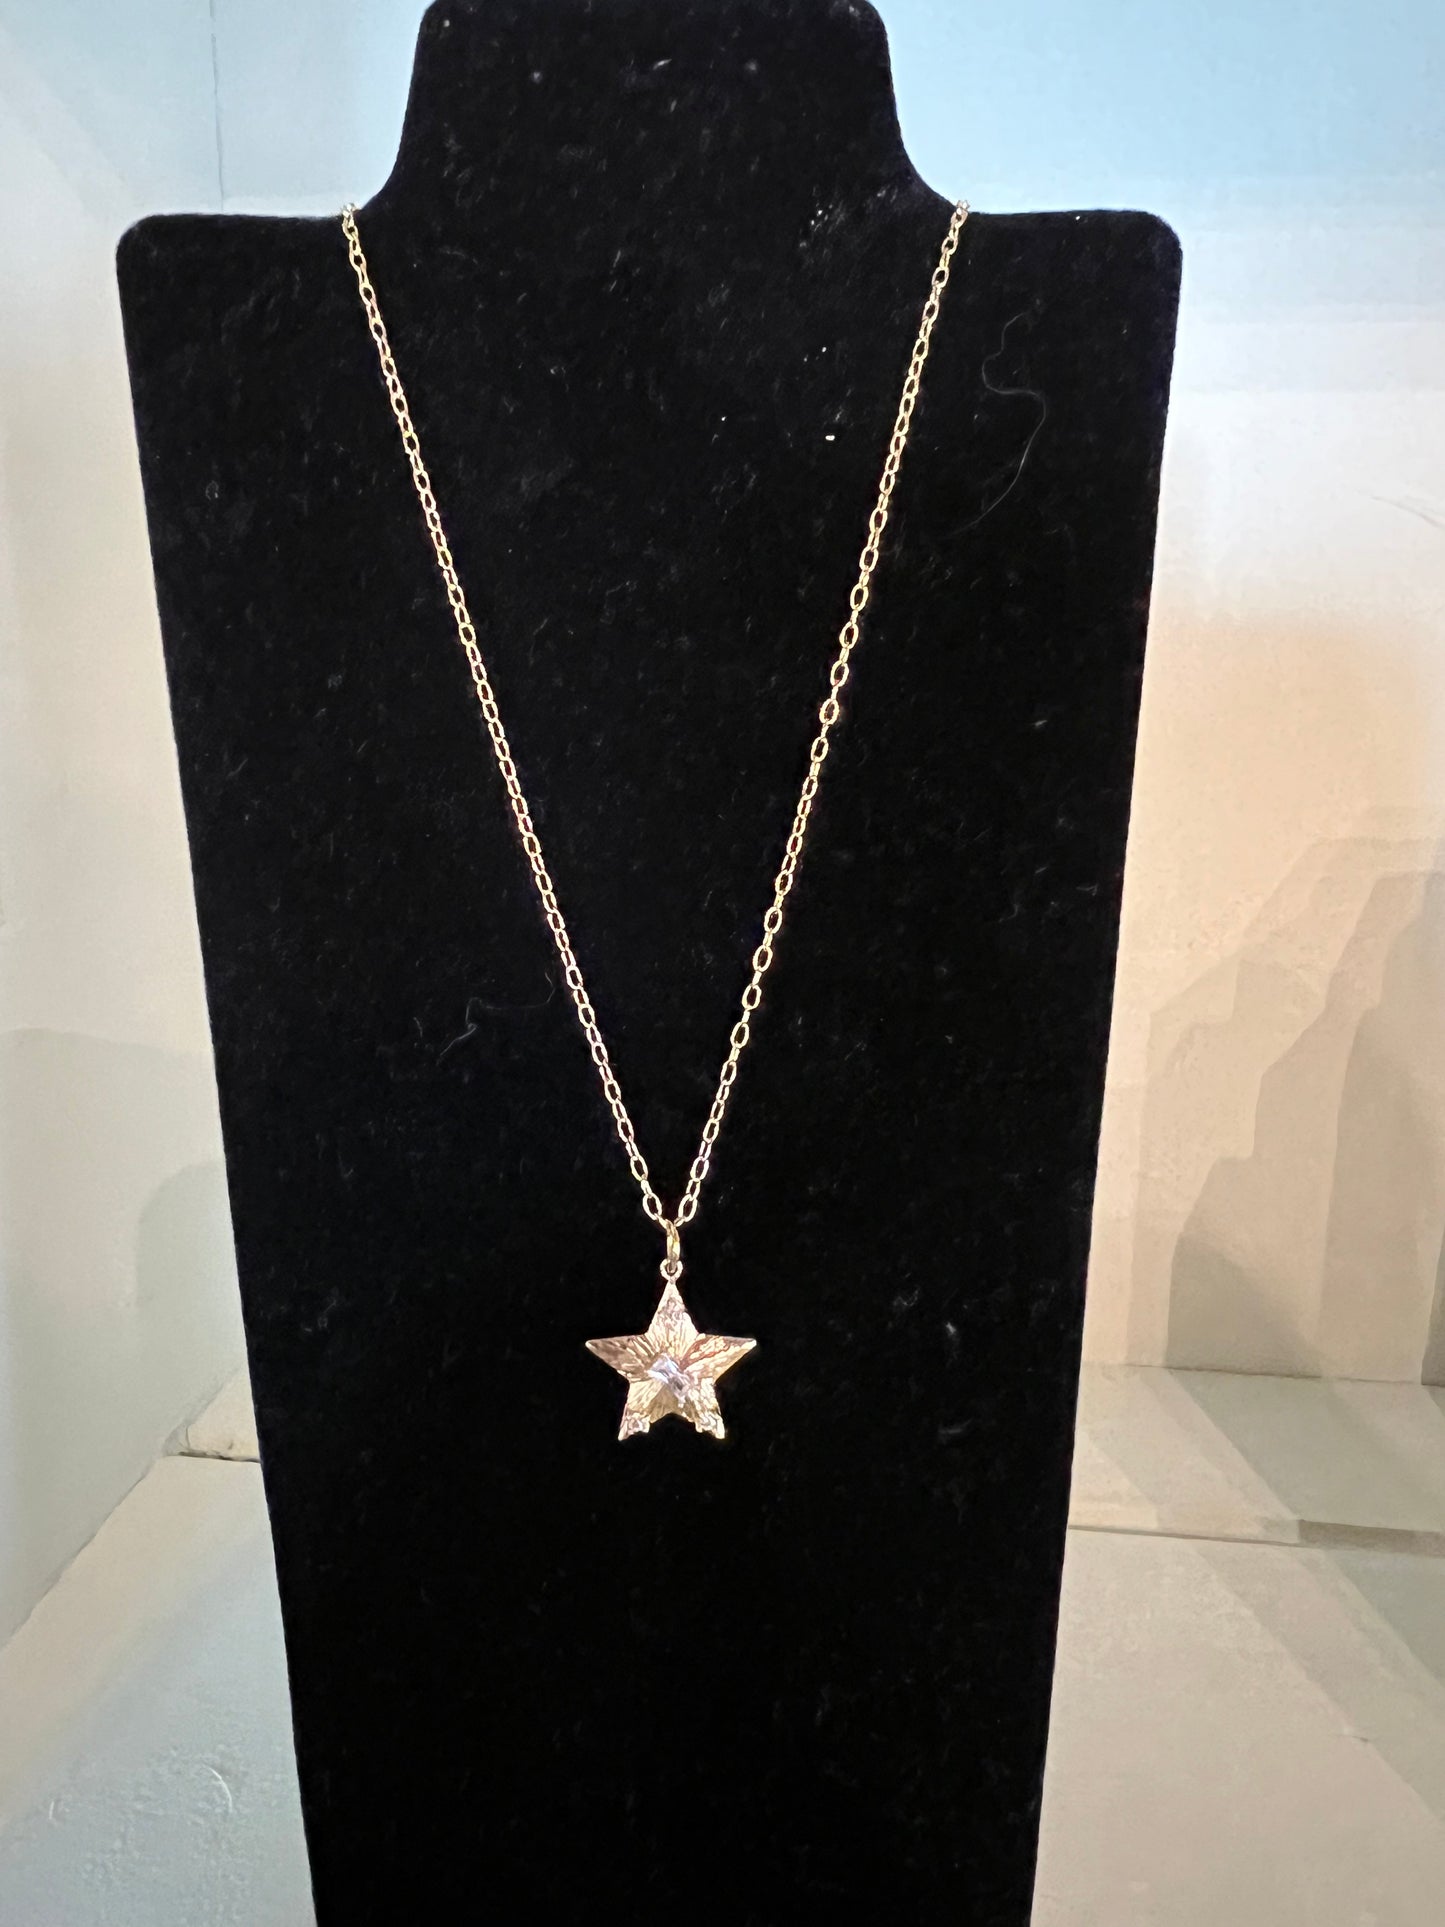 Star Charm Pendant, 18k Gold Filled Necklace.